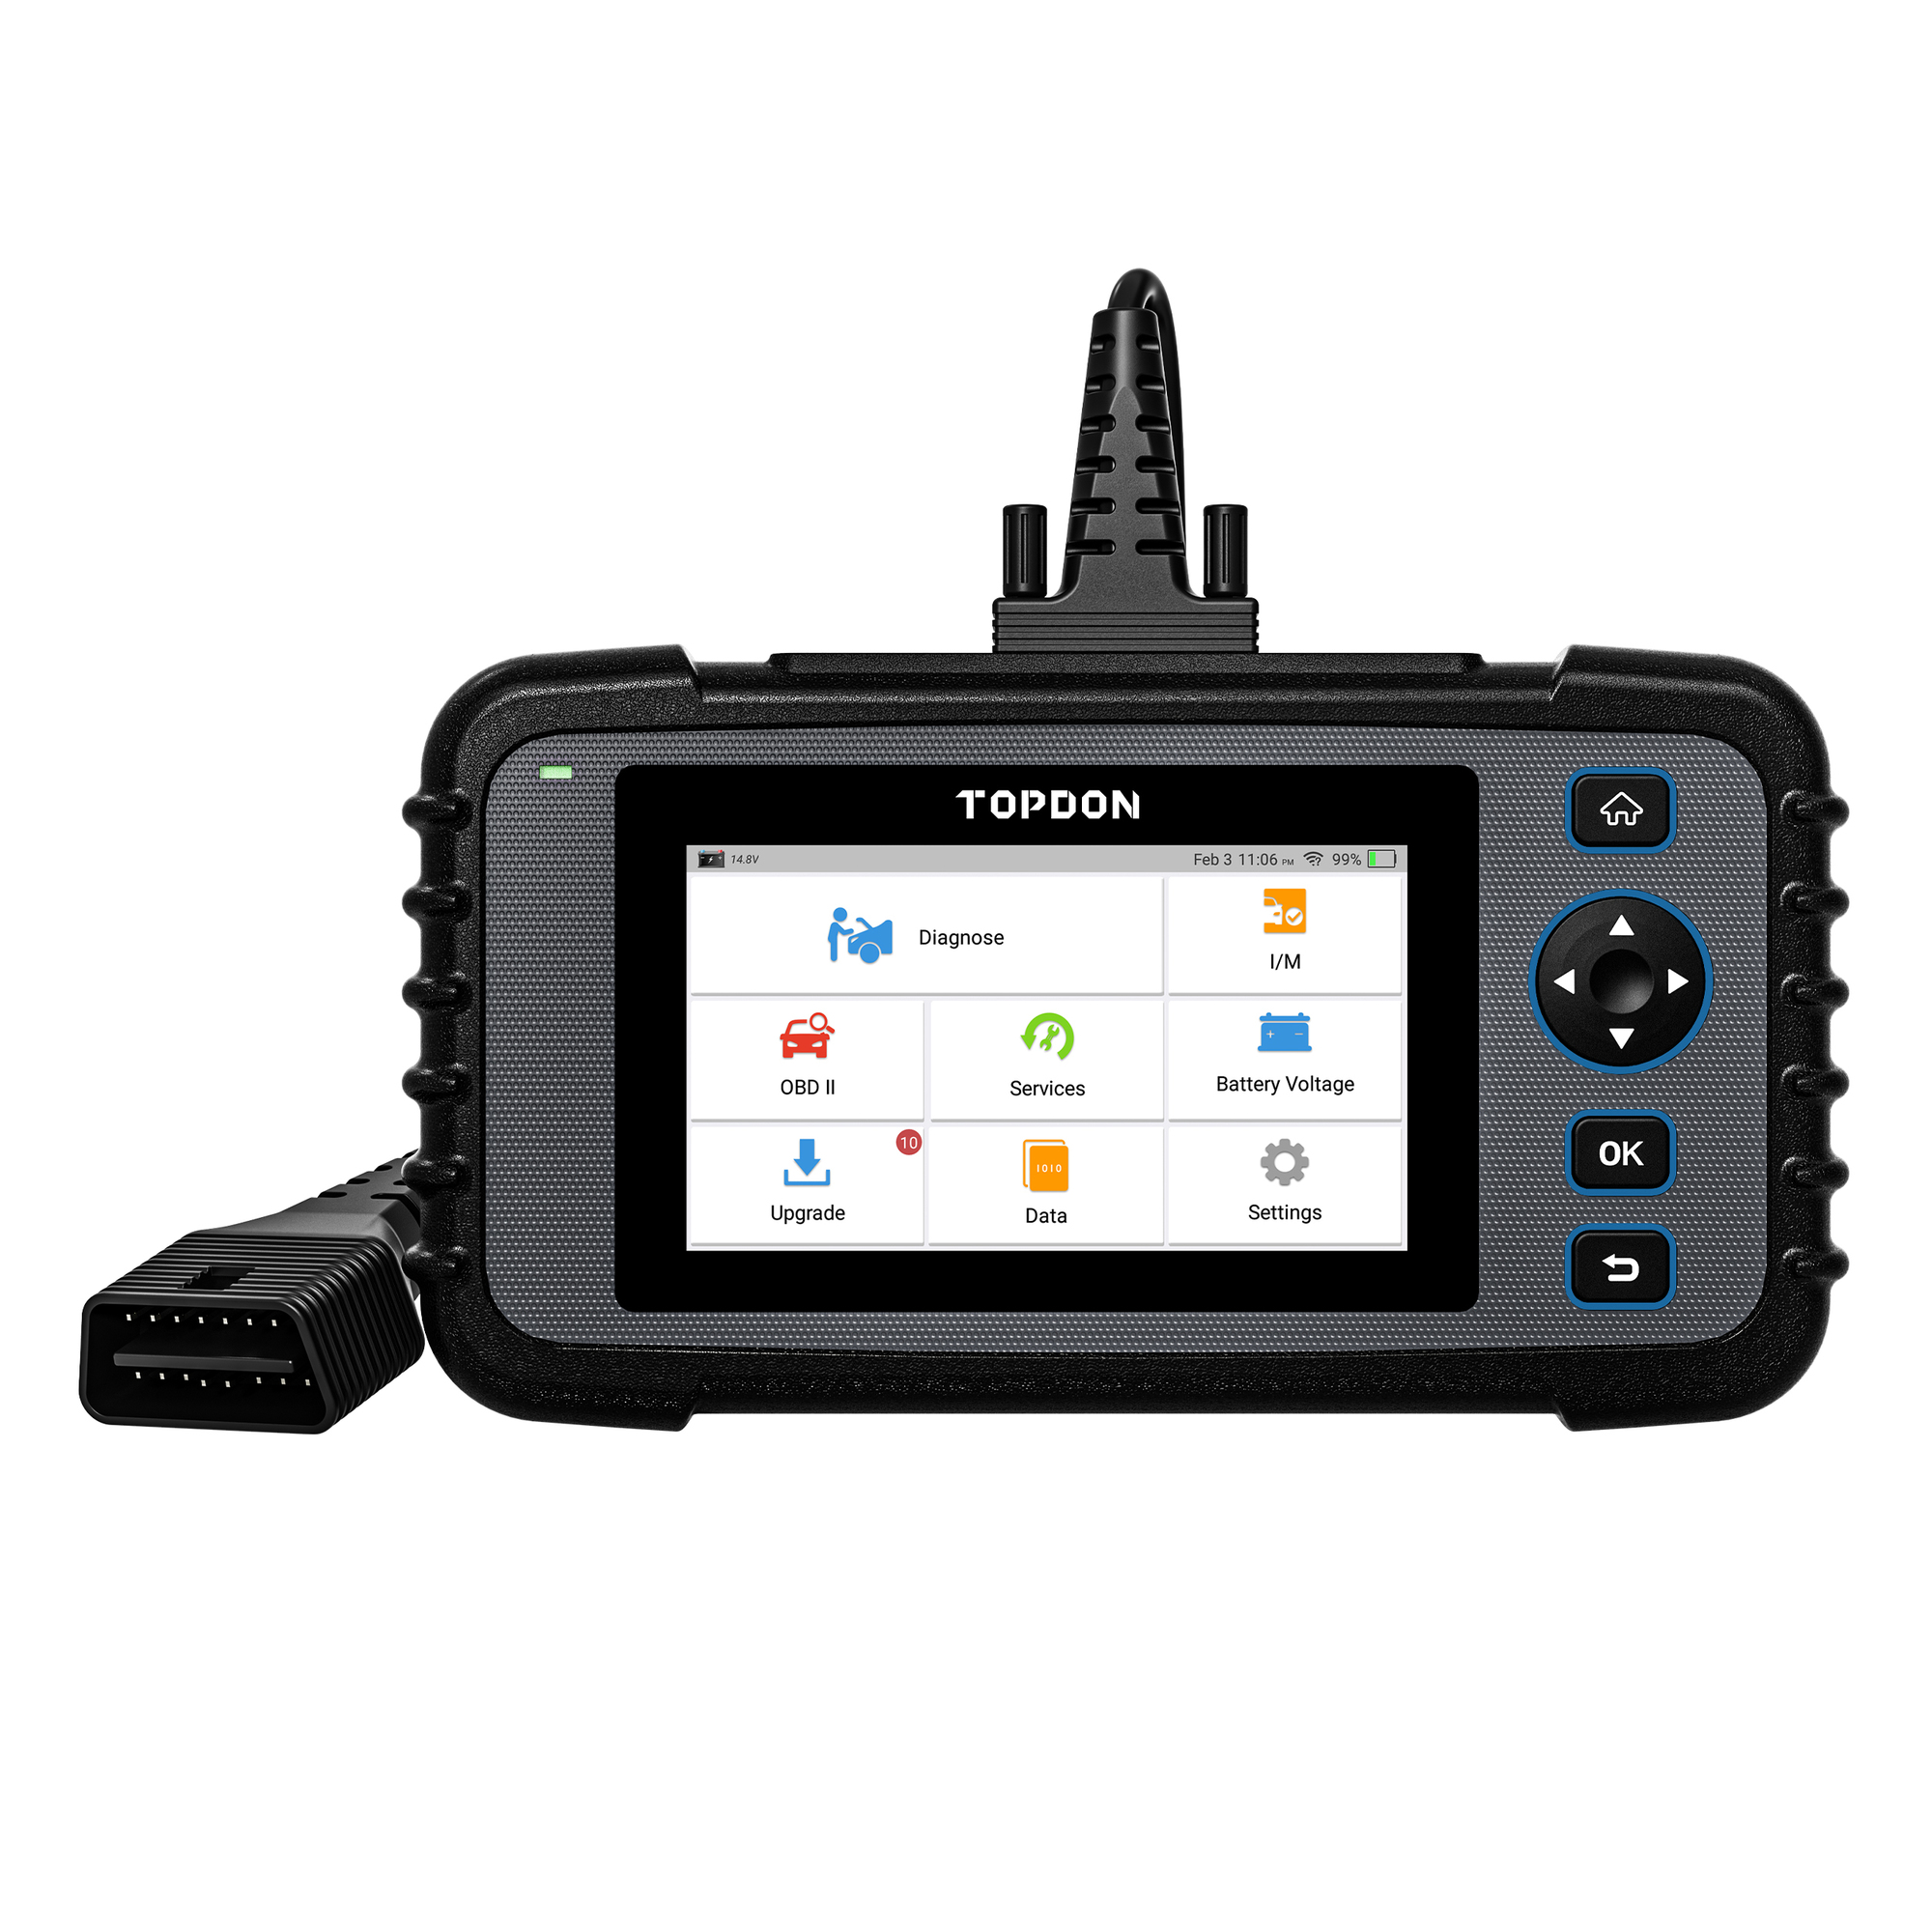 TOPDON, Android based OBD IIS can Tool w/Service Resets, Model AD600